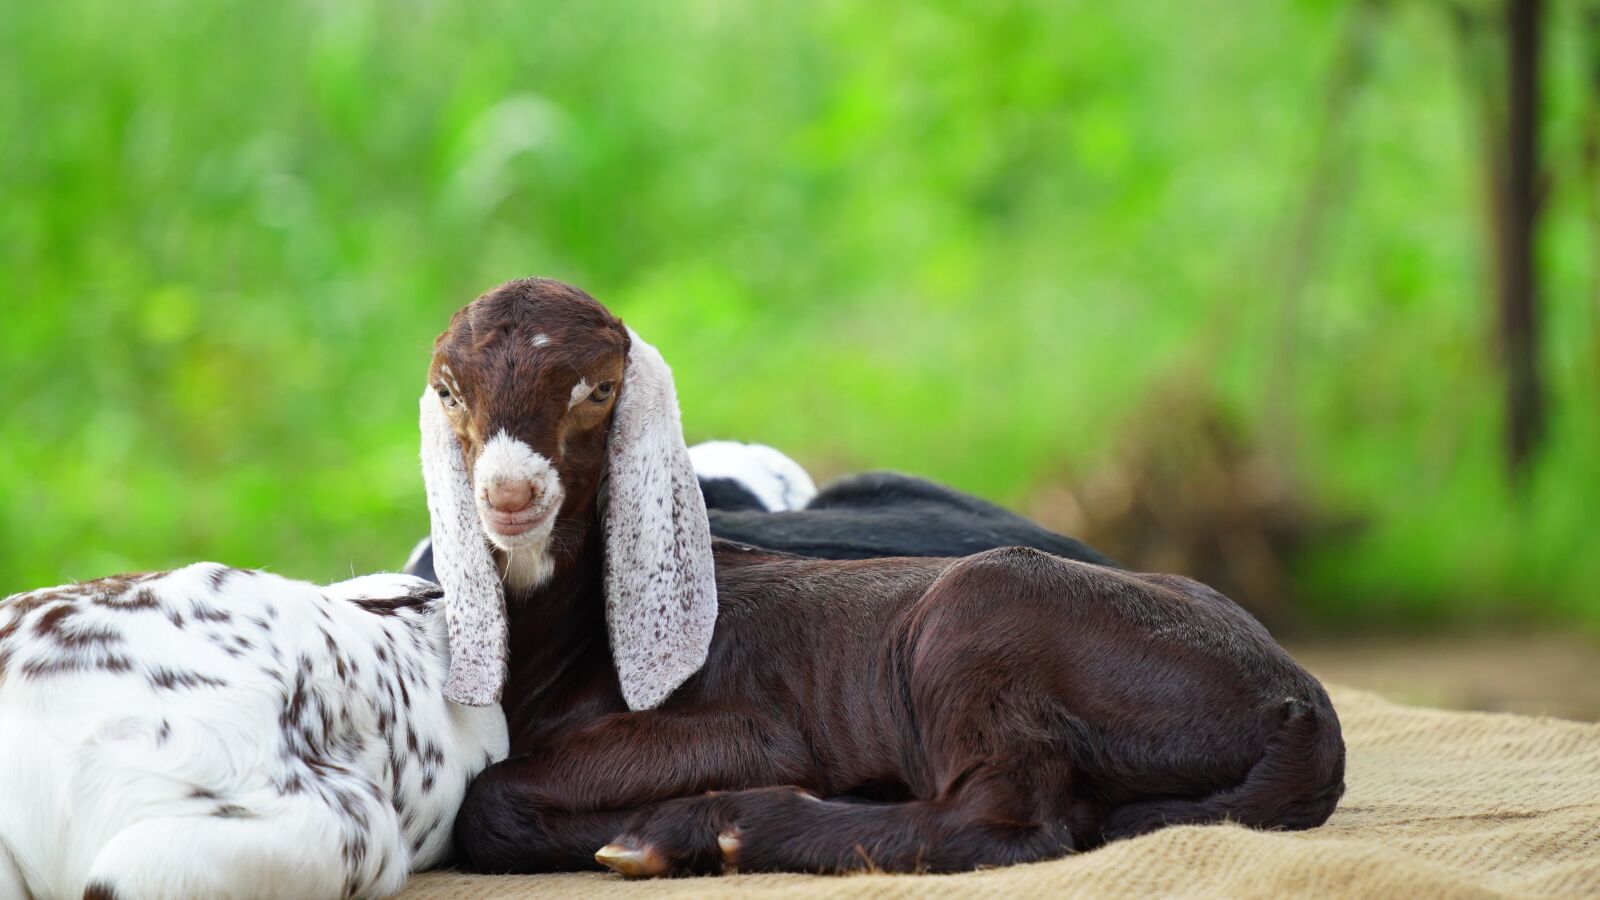 Sony a7 III sample photo. Goat, lings, pet photography